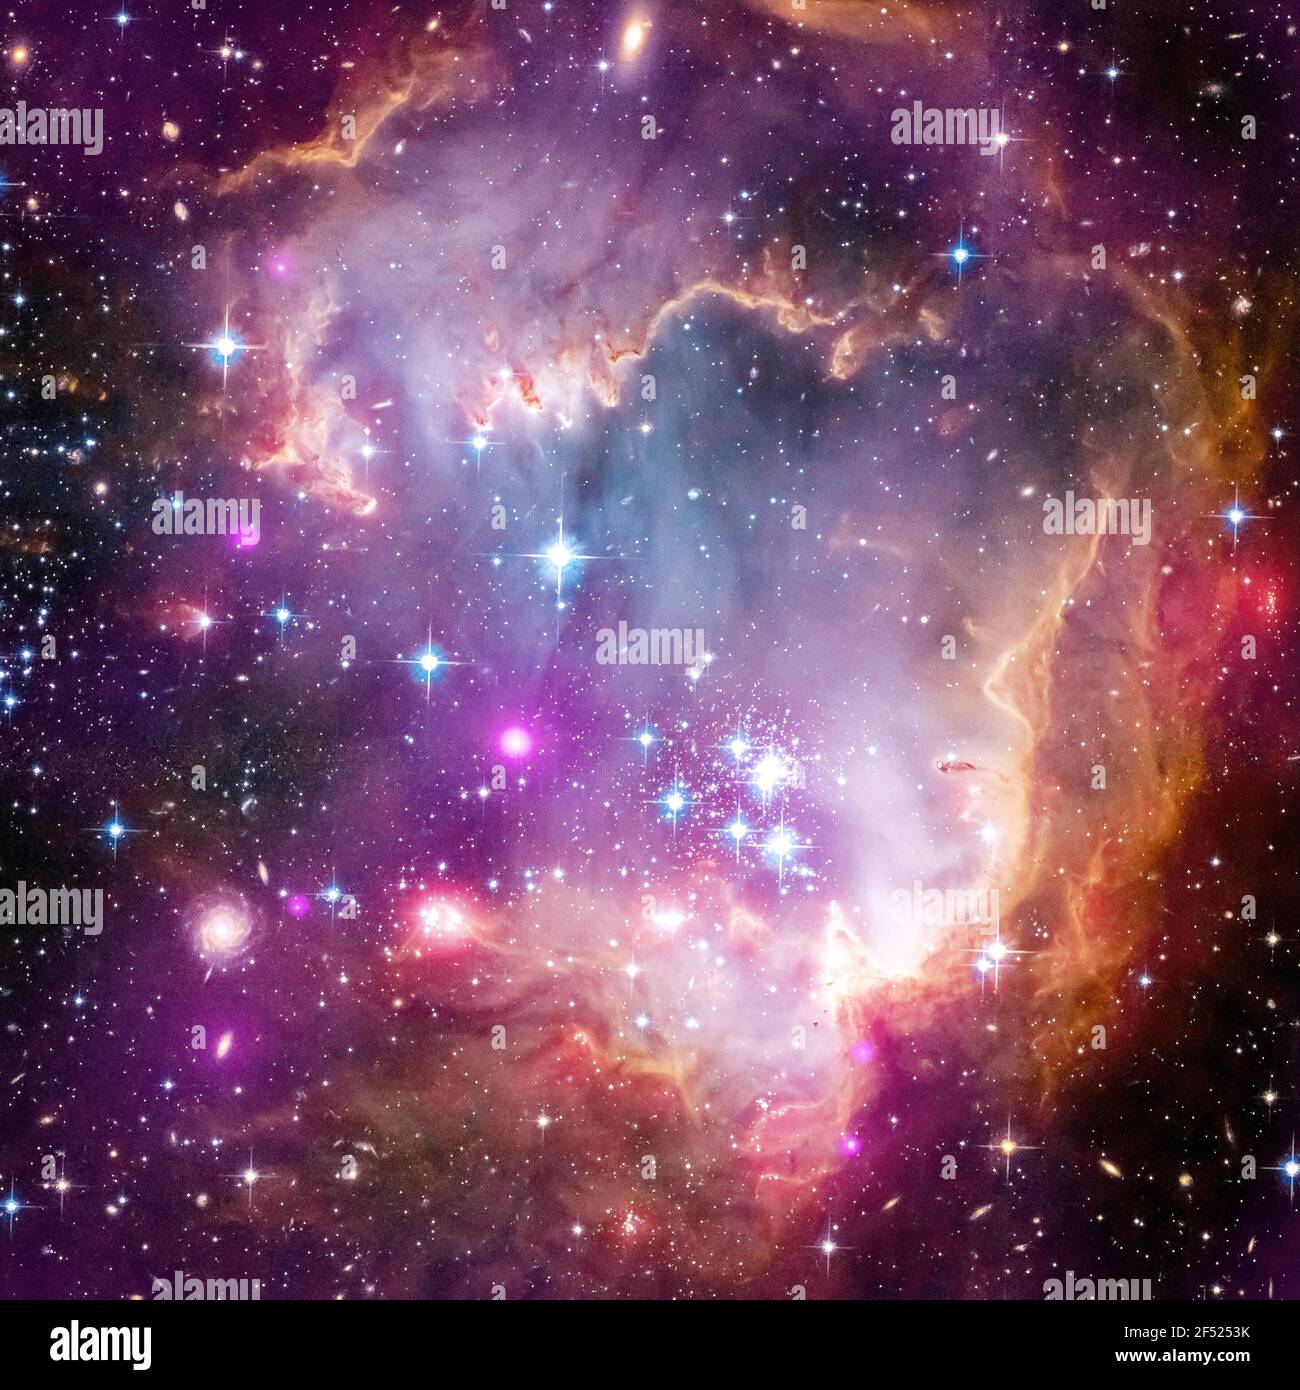 Chandra observations, shown in purple, show x-ray emissions from young stars with masses similar to our Sun. The “Wing” of the Small Magellanic Cloud. Stock Photo